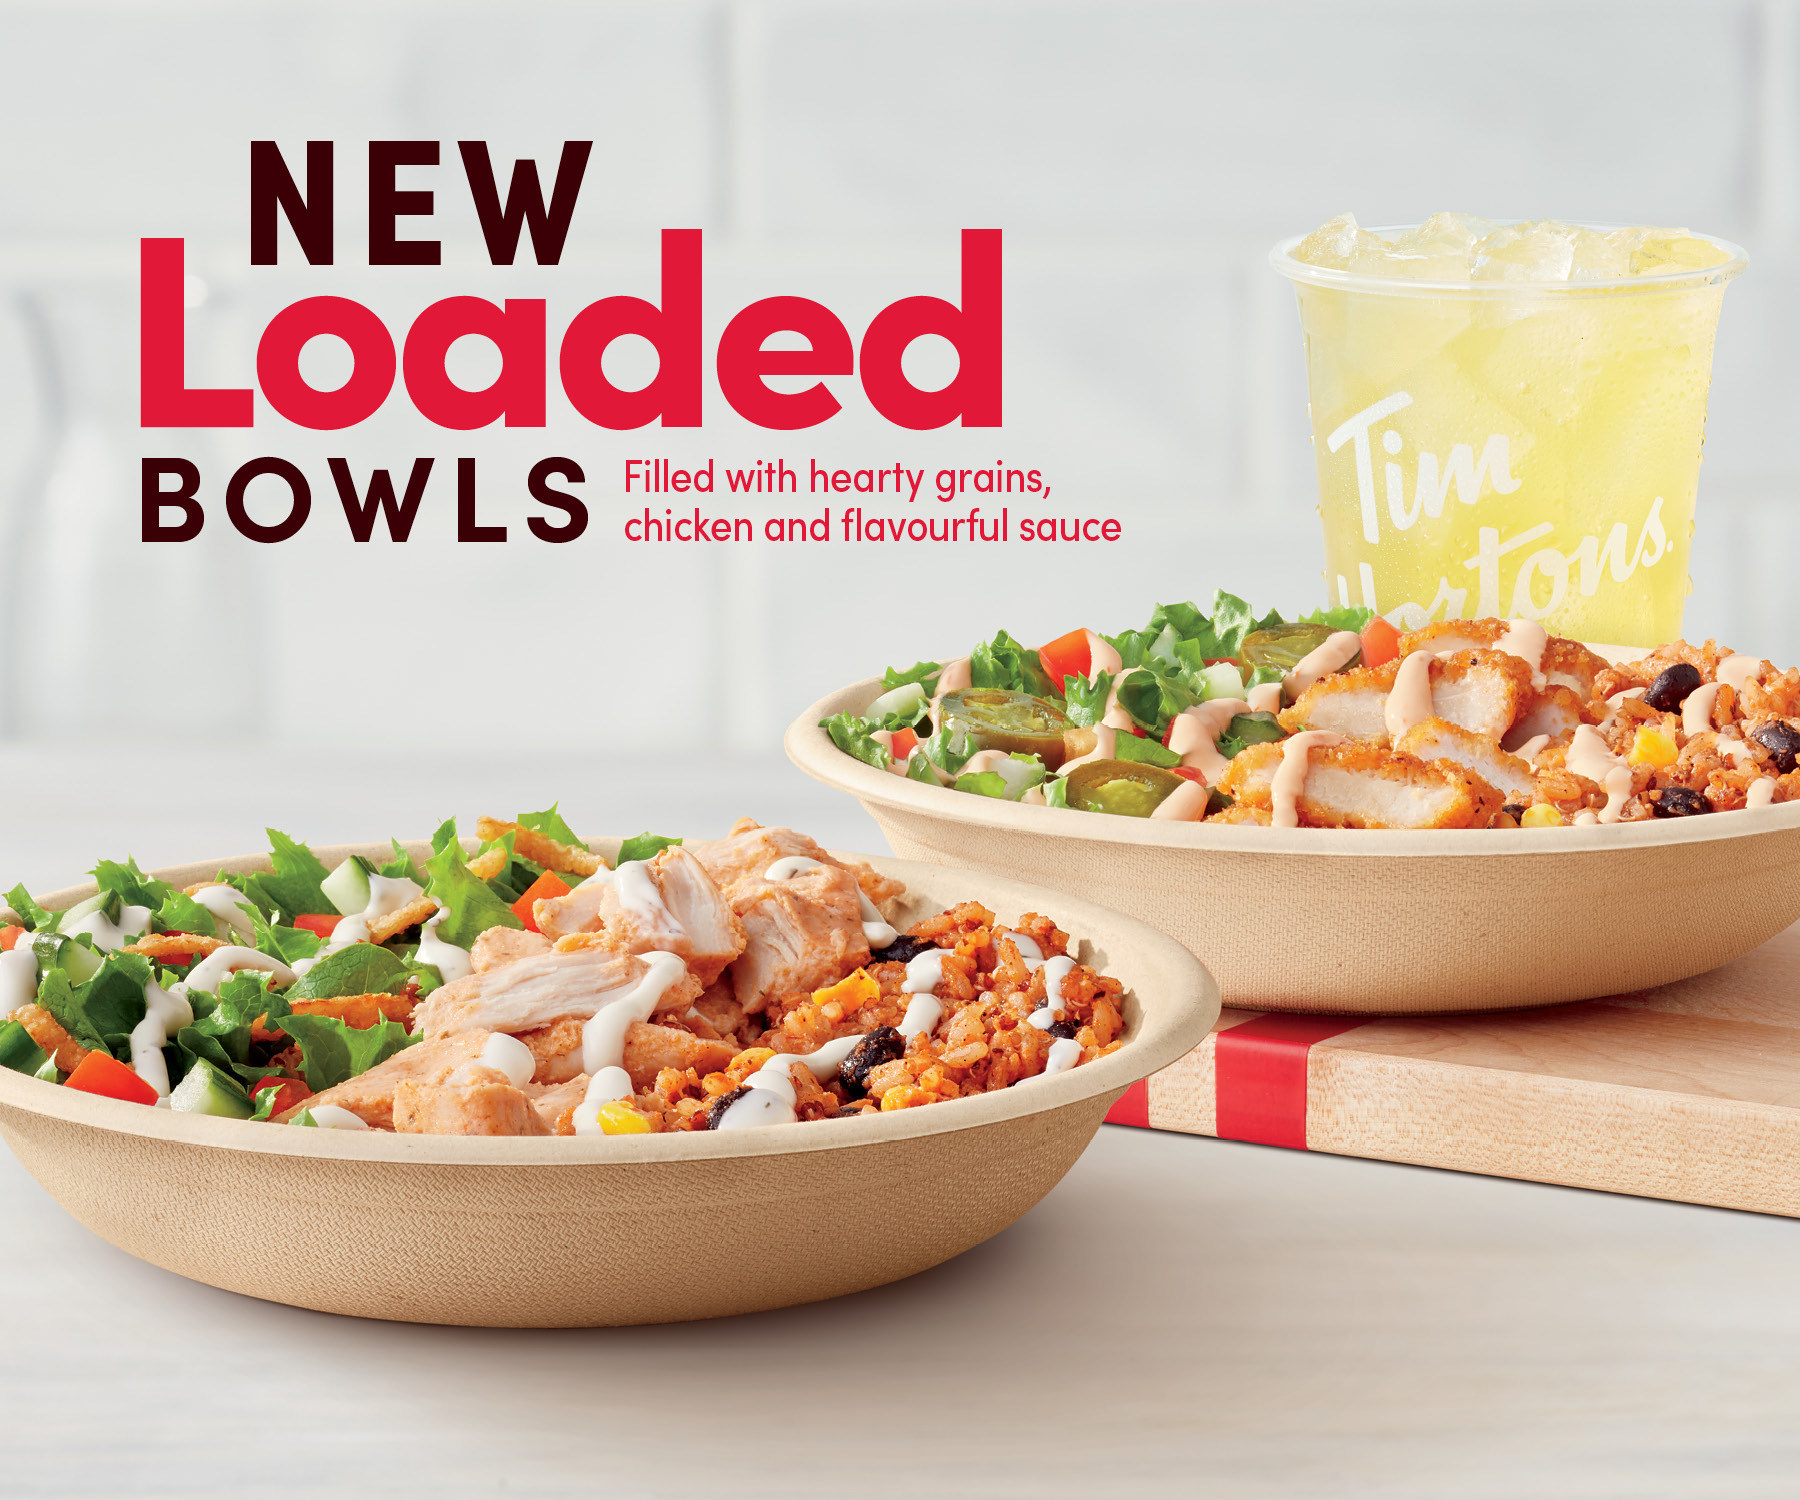 Tim Hortons-Introducing Loaded Bowls- the new fresh and craveabl